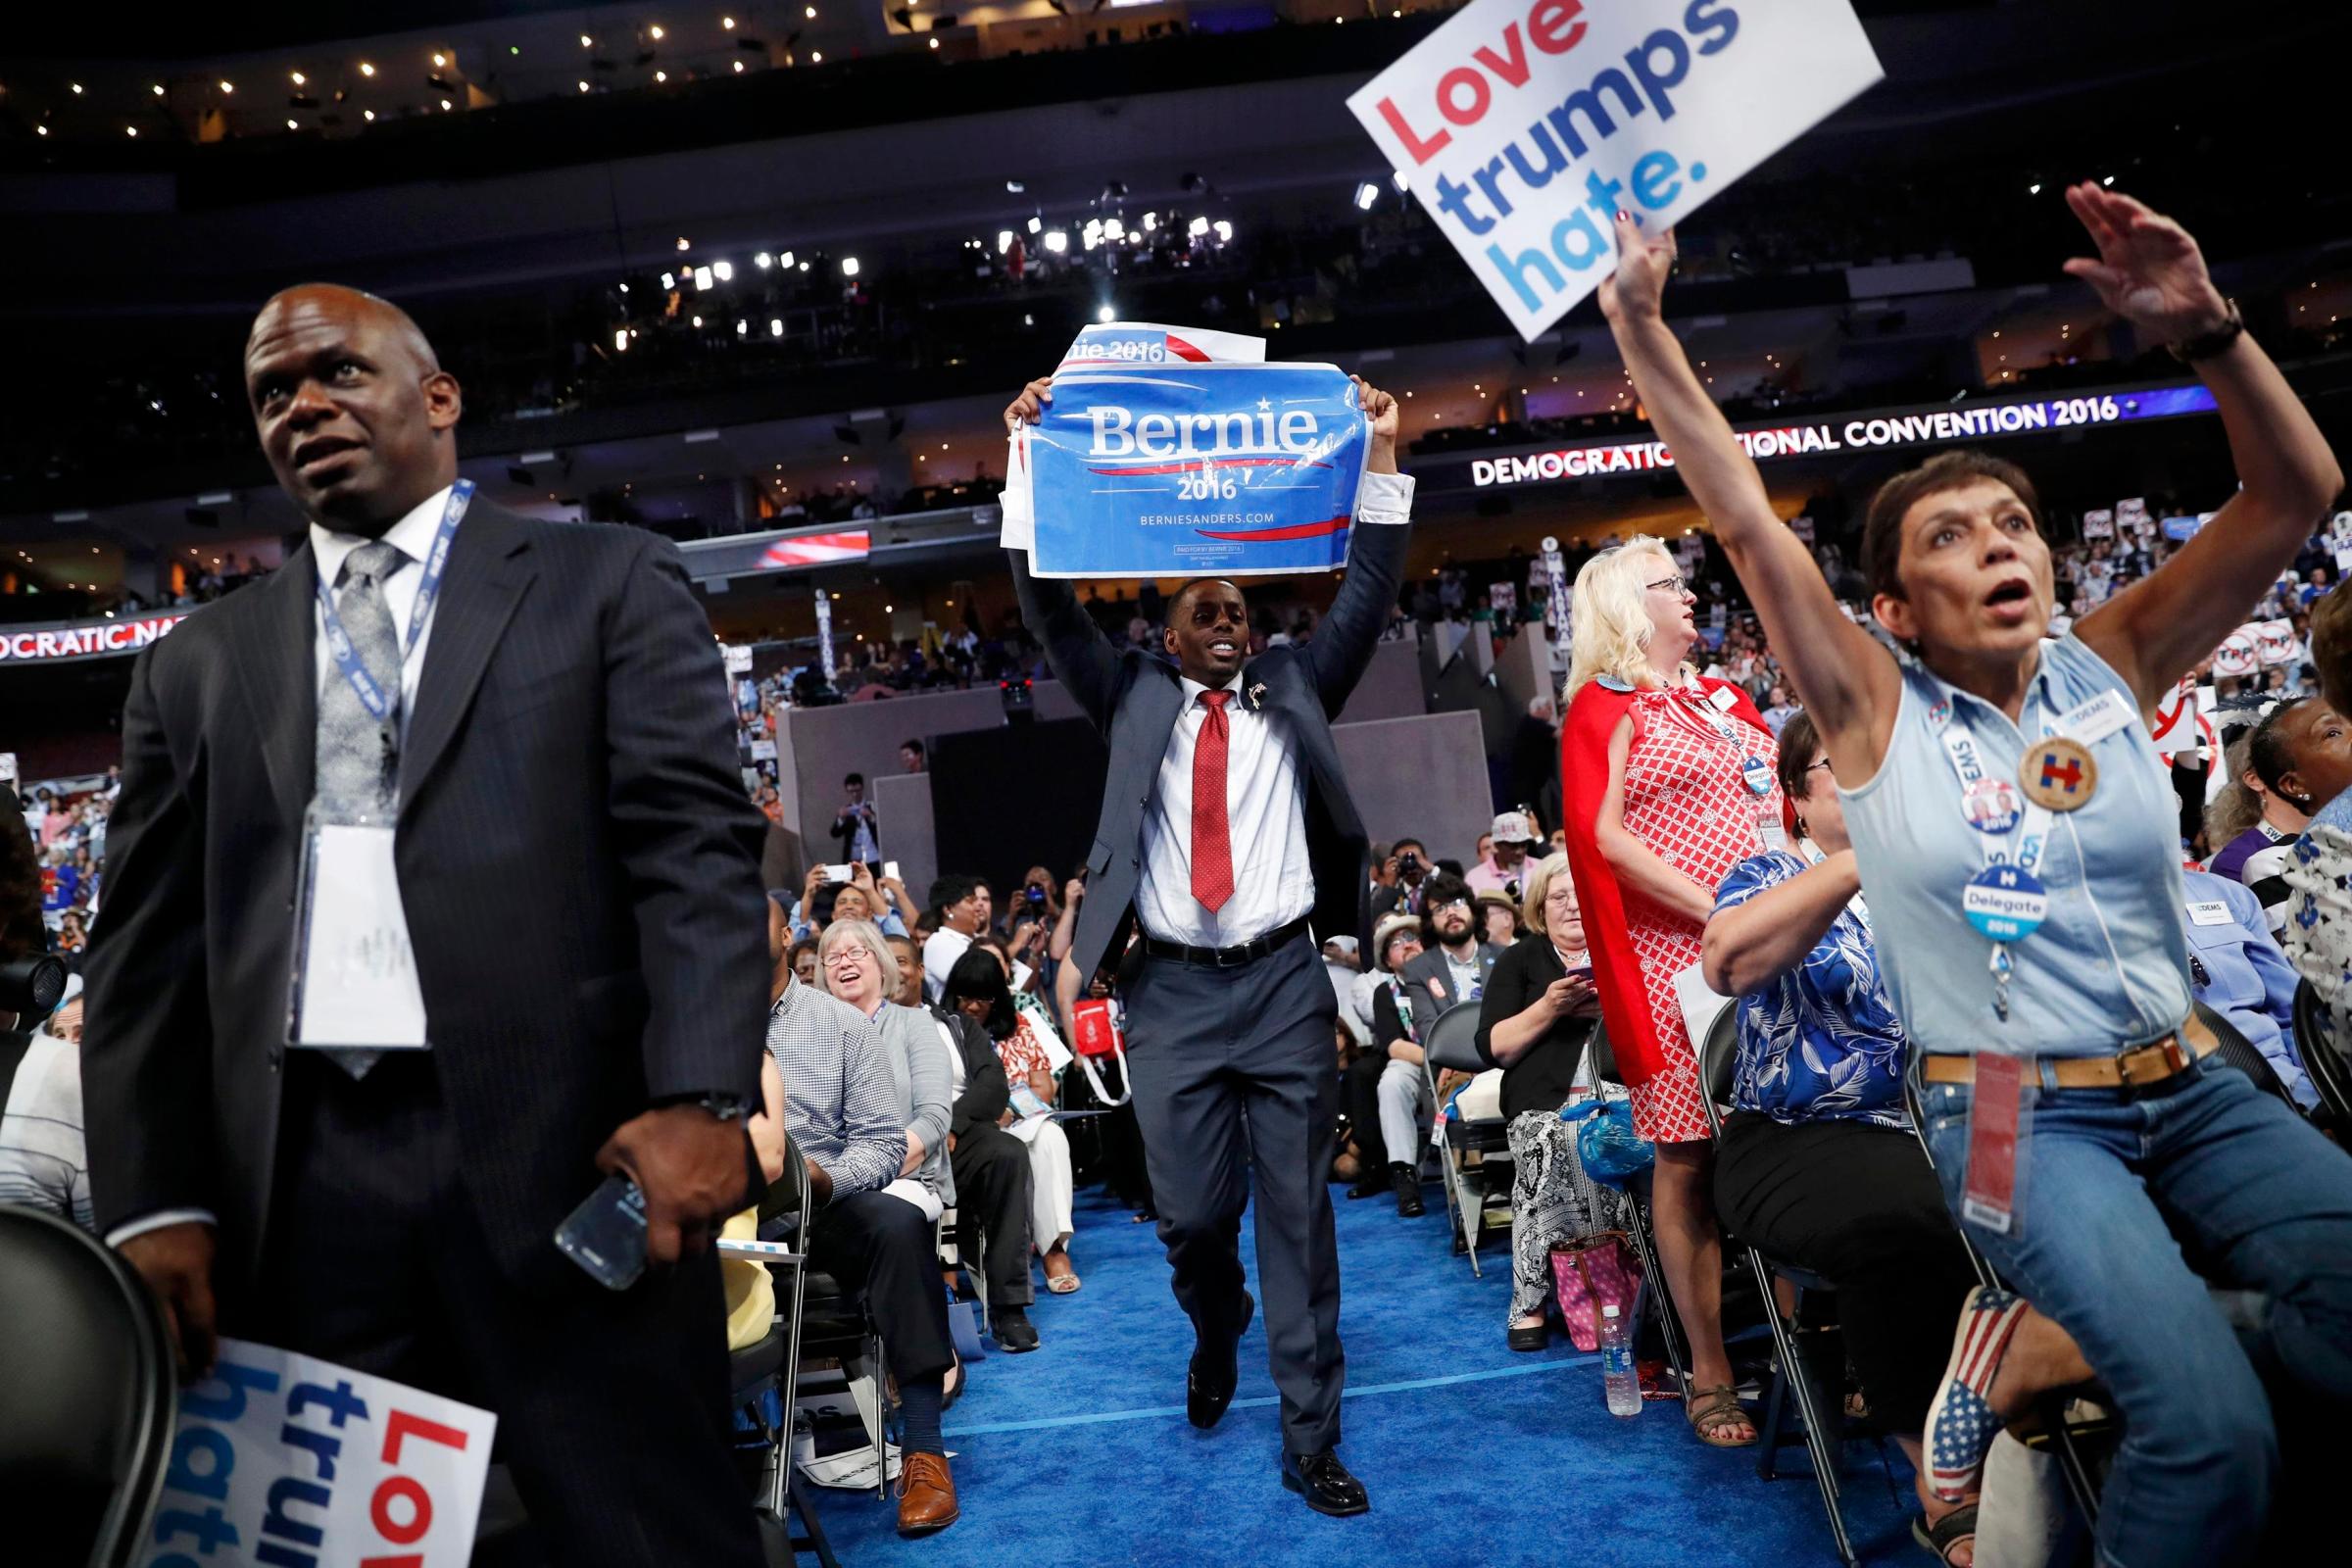 A supporter of former Democratic presidential candidate Bernie Sanders approaches the podium with a Sanders campaign sign during the report of the Rules Committee at the Democratic National Convention in Philadelphia on July 25, 2016.